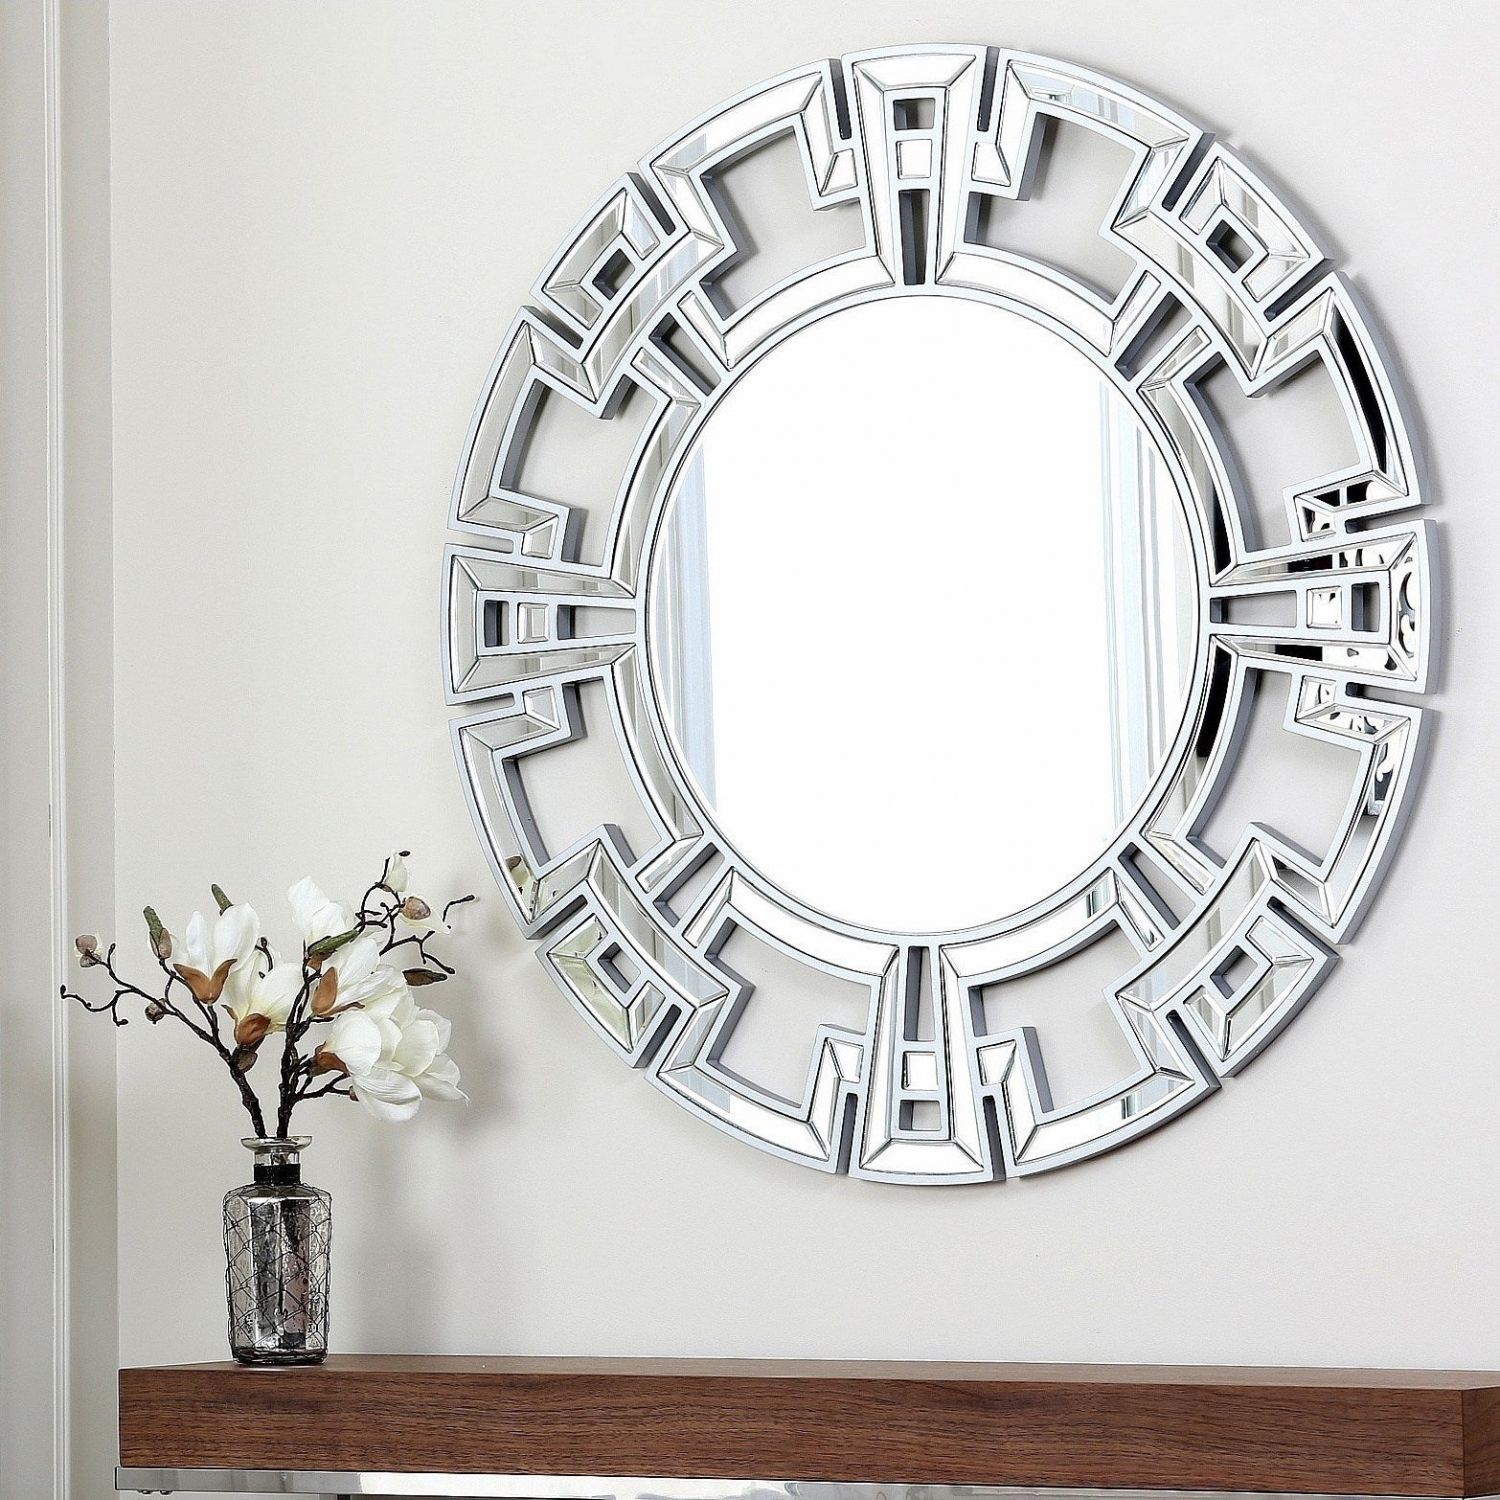 Large Round Silver Wall Mirror Geometric Greek Key Design Glam Mod Chic Throughout Vertical Round Wall Mirrors (View 8 of 15)